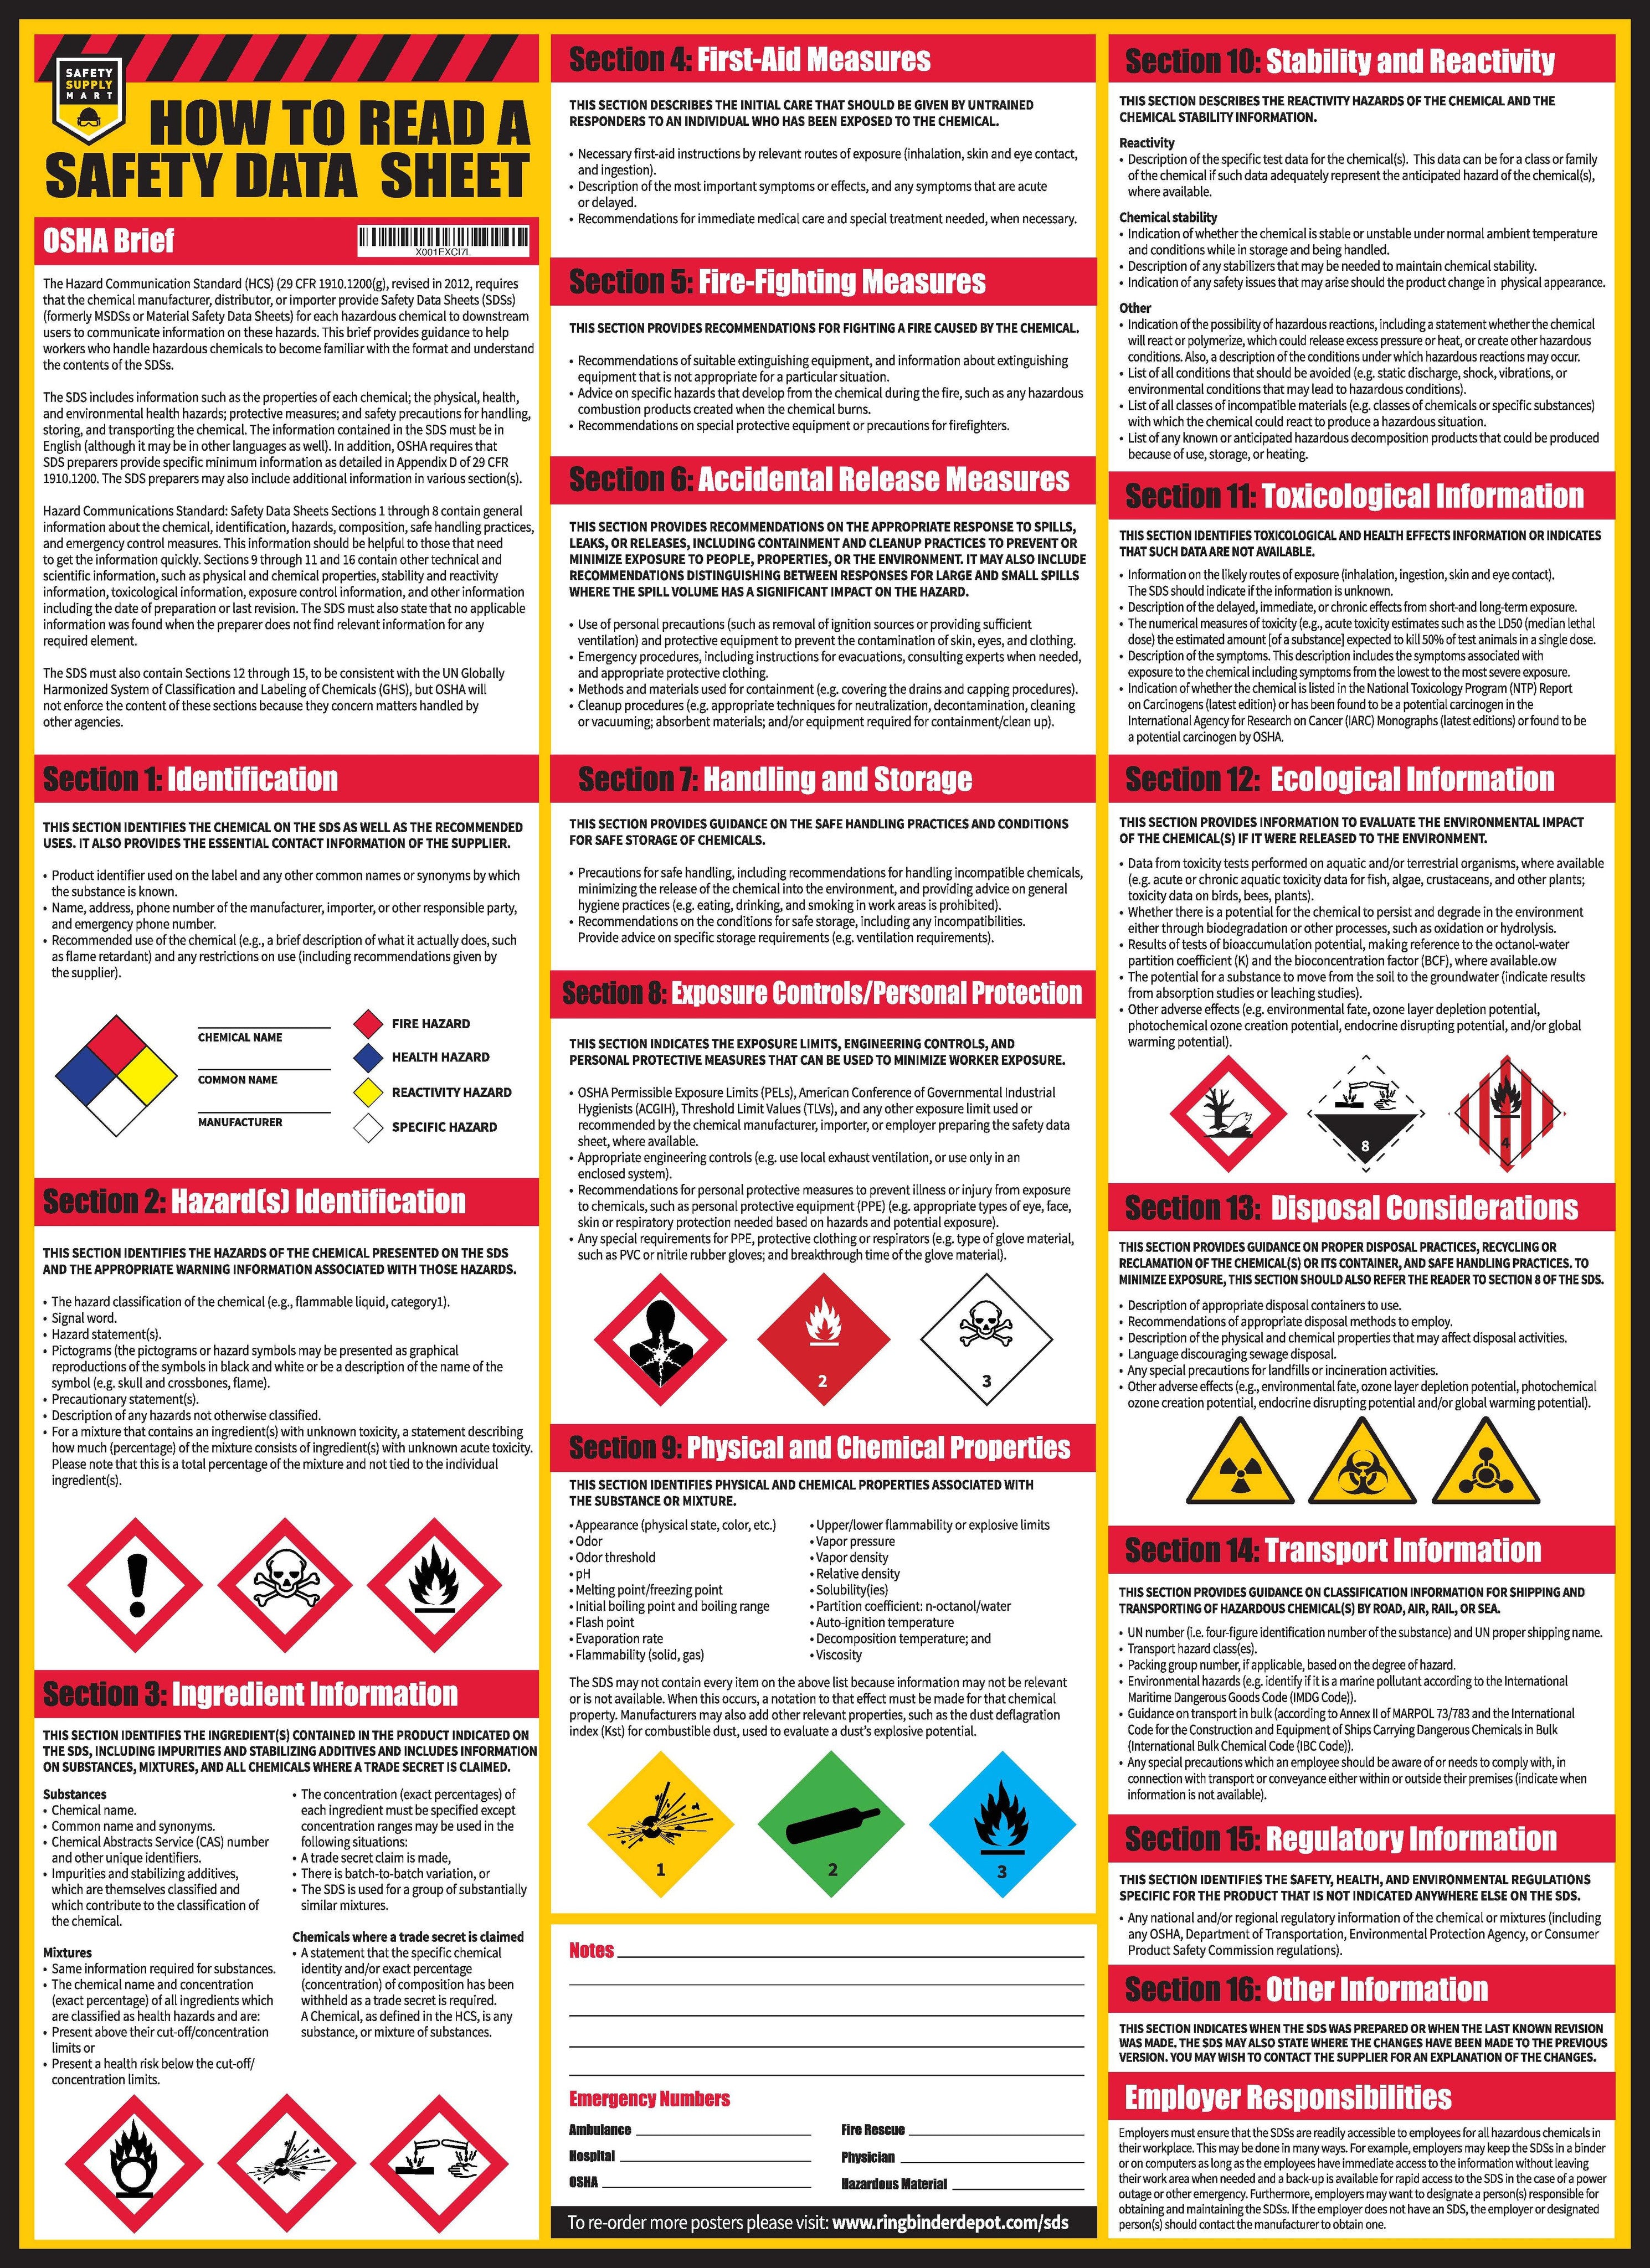 How To Read A Safety Data Sheet Poster